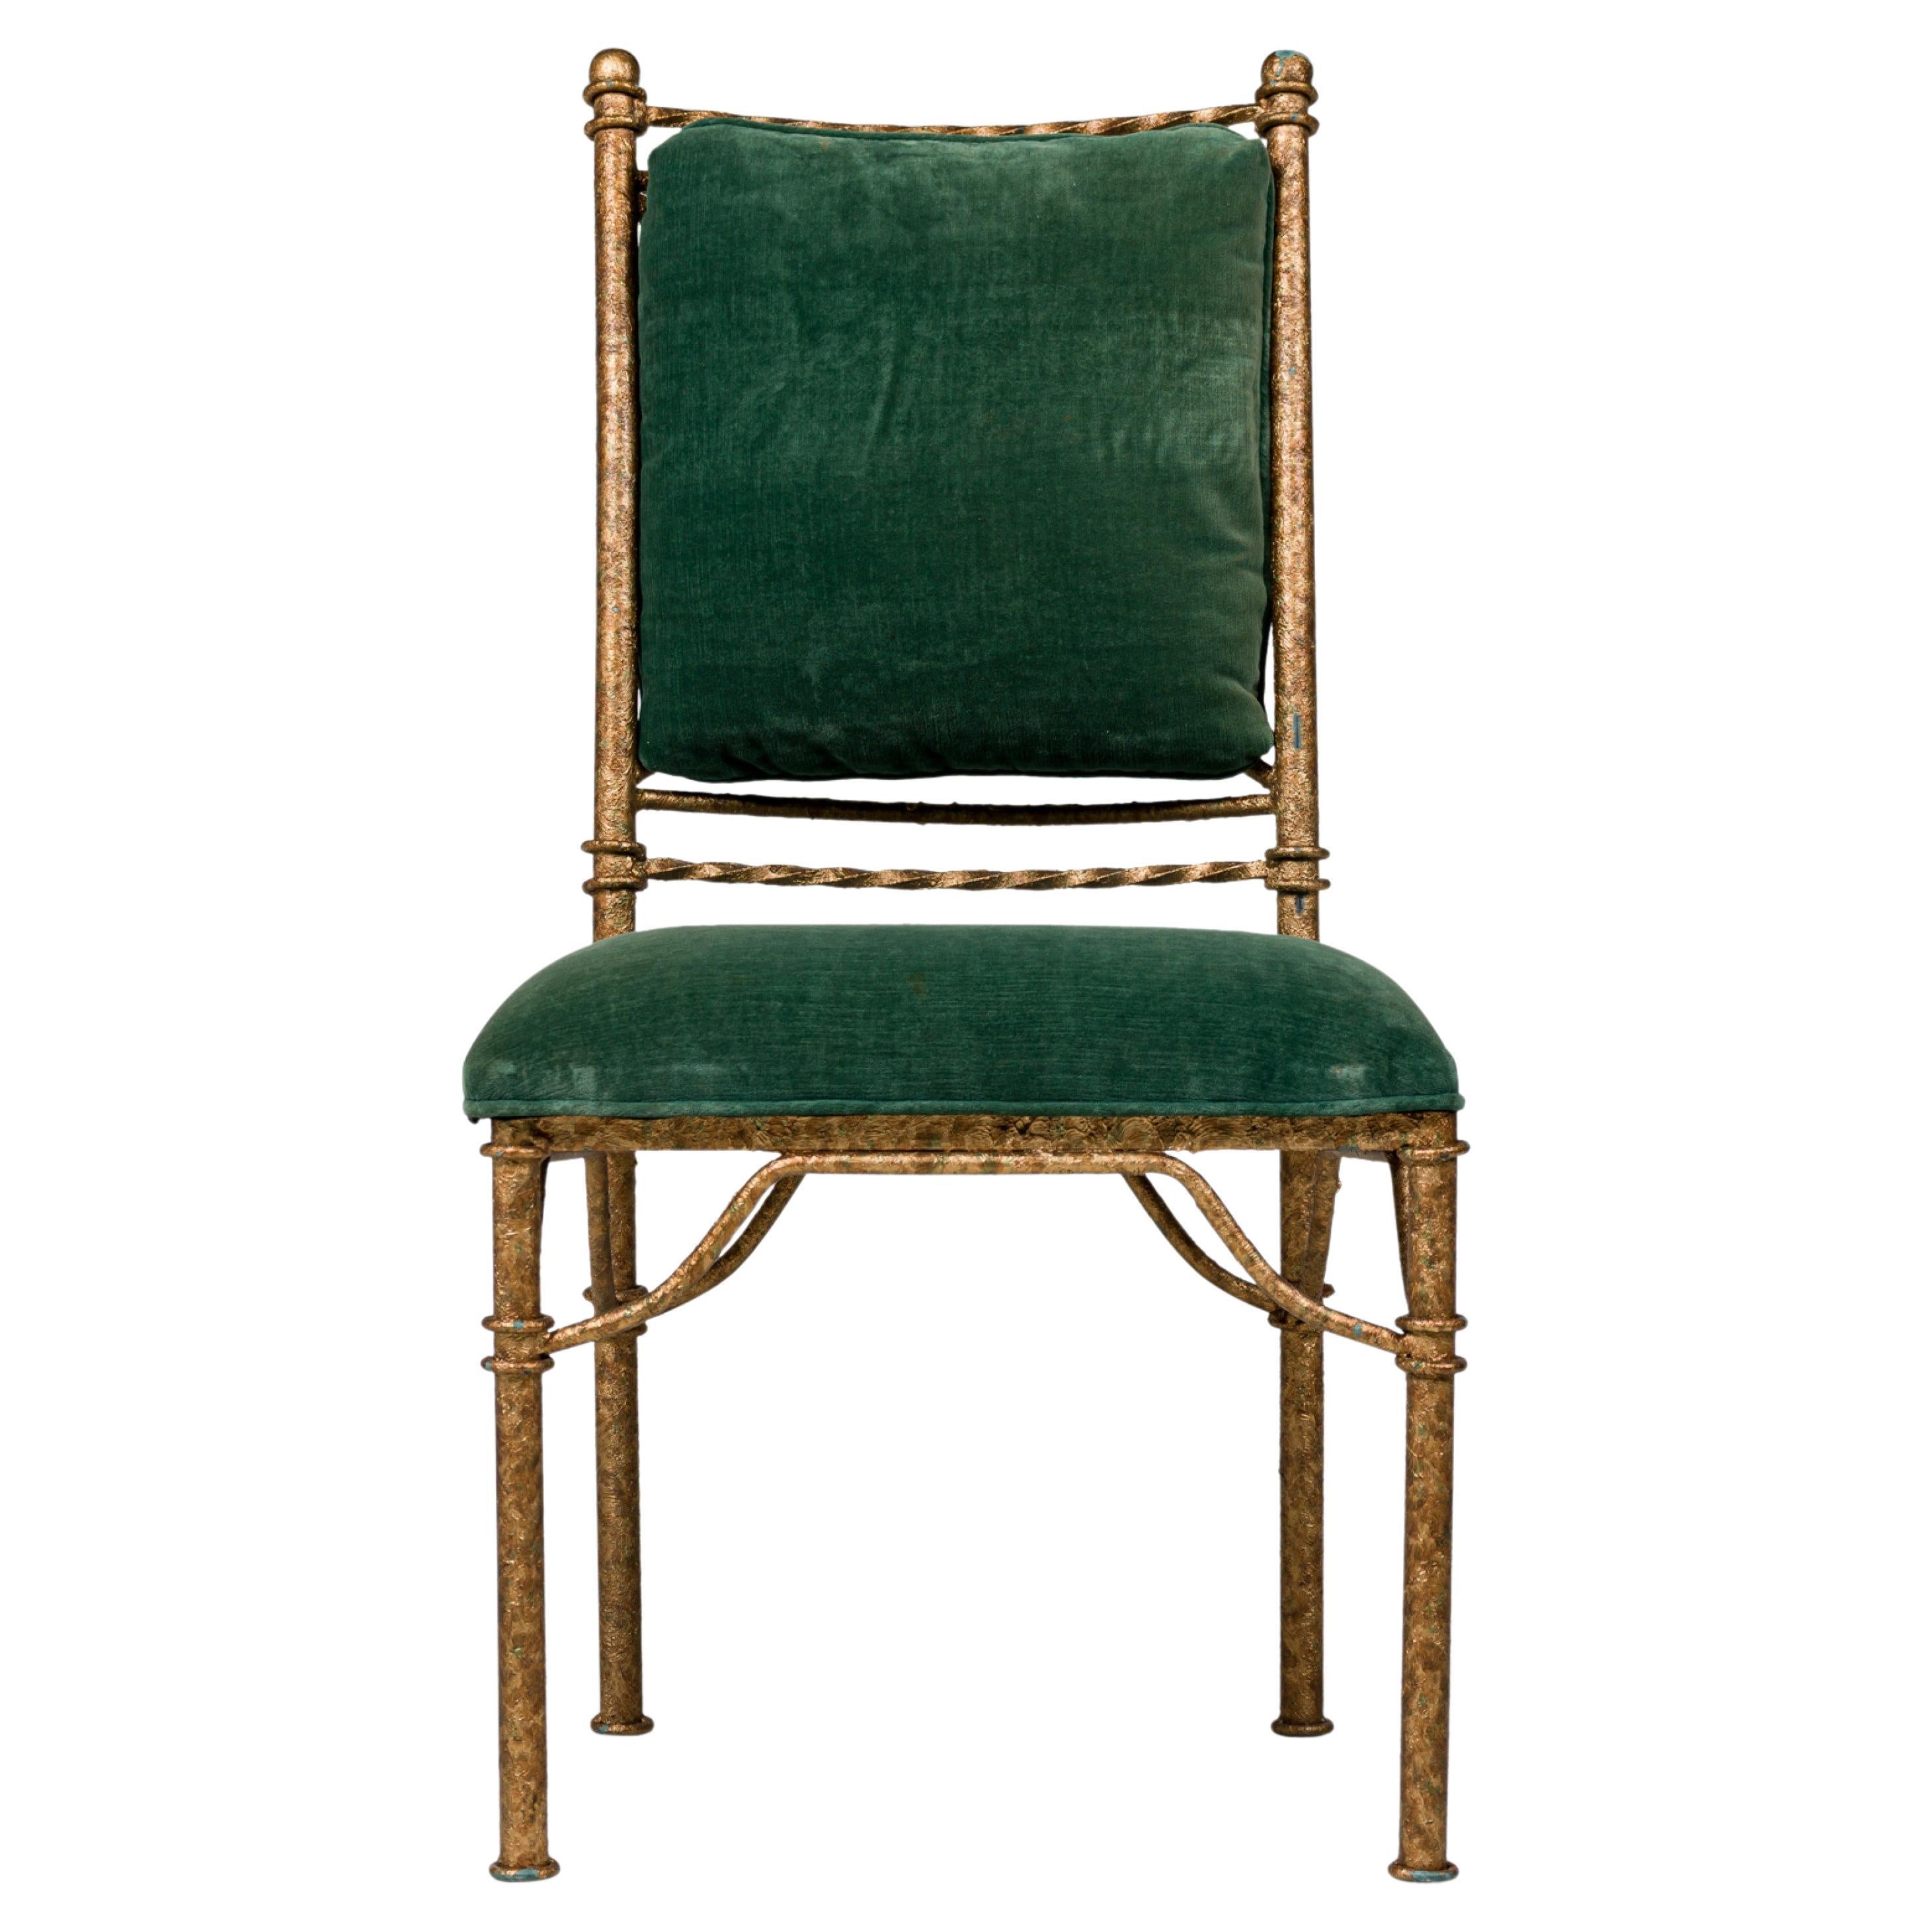 SET of 6 Italian Mid-Century side chairs with gilt wrought iron frames and sage green velvet upholstered seats with matching removable back cushions that attach to the frames by velcro loops. (PRICED AS SET).